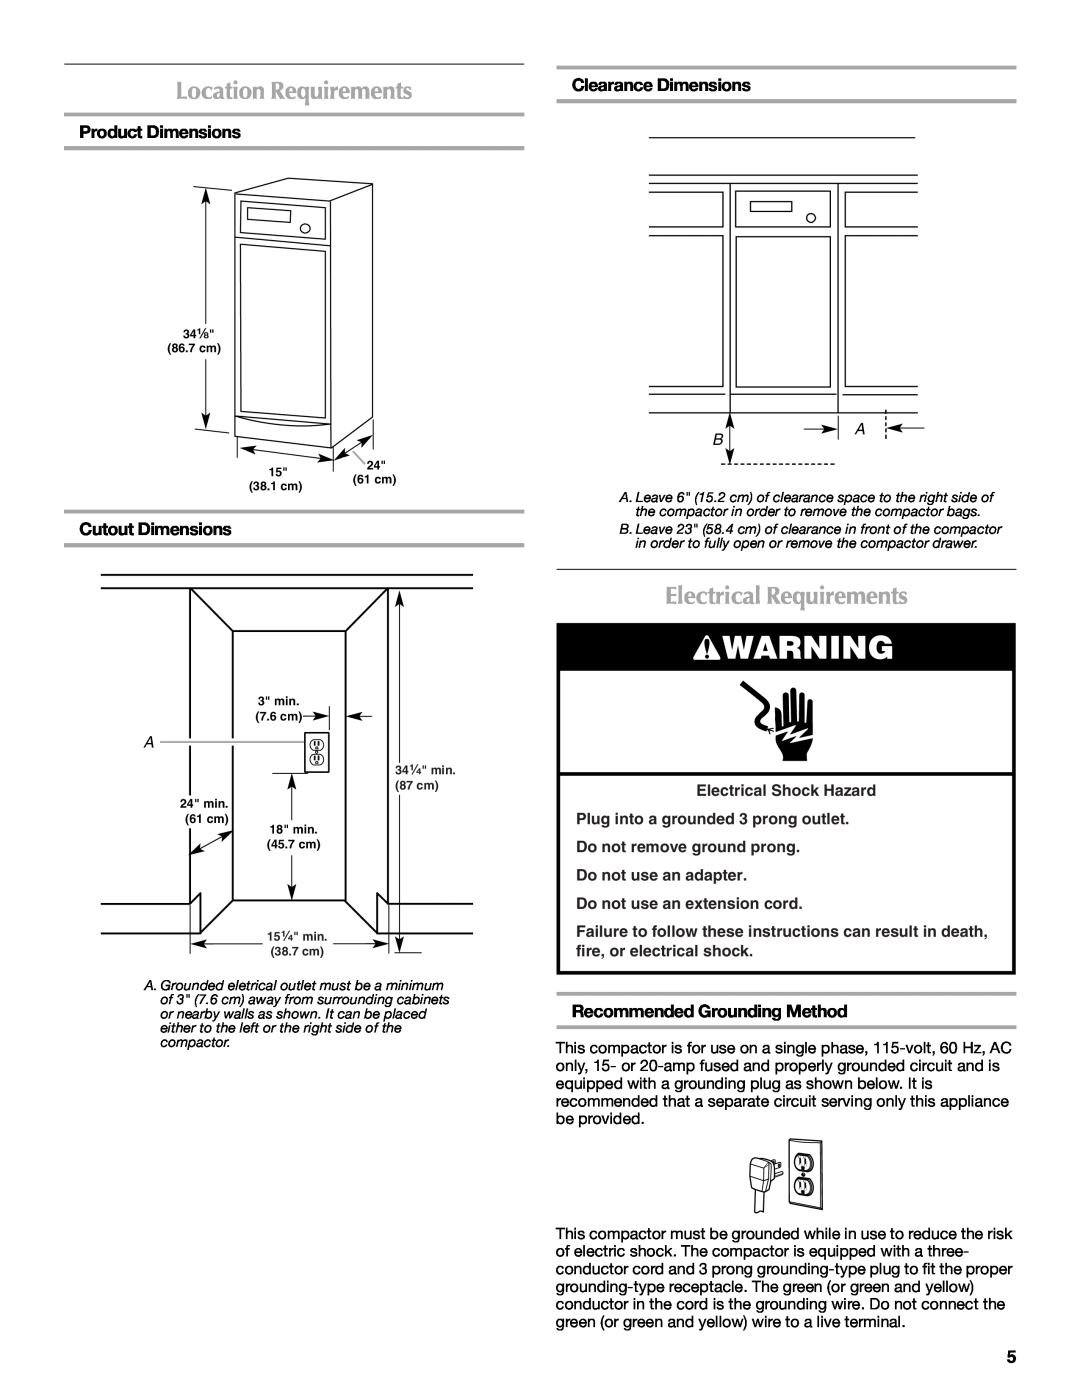 Maytag MTUC7000AWS, W10190314A Location Requirements, Electrical Requirements, Product Dimensions, Clearance Dimensions 